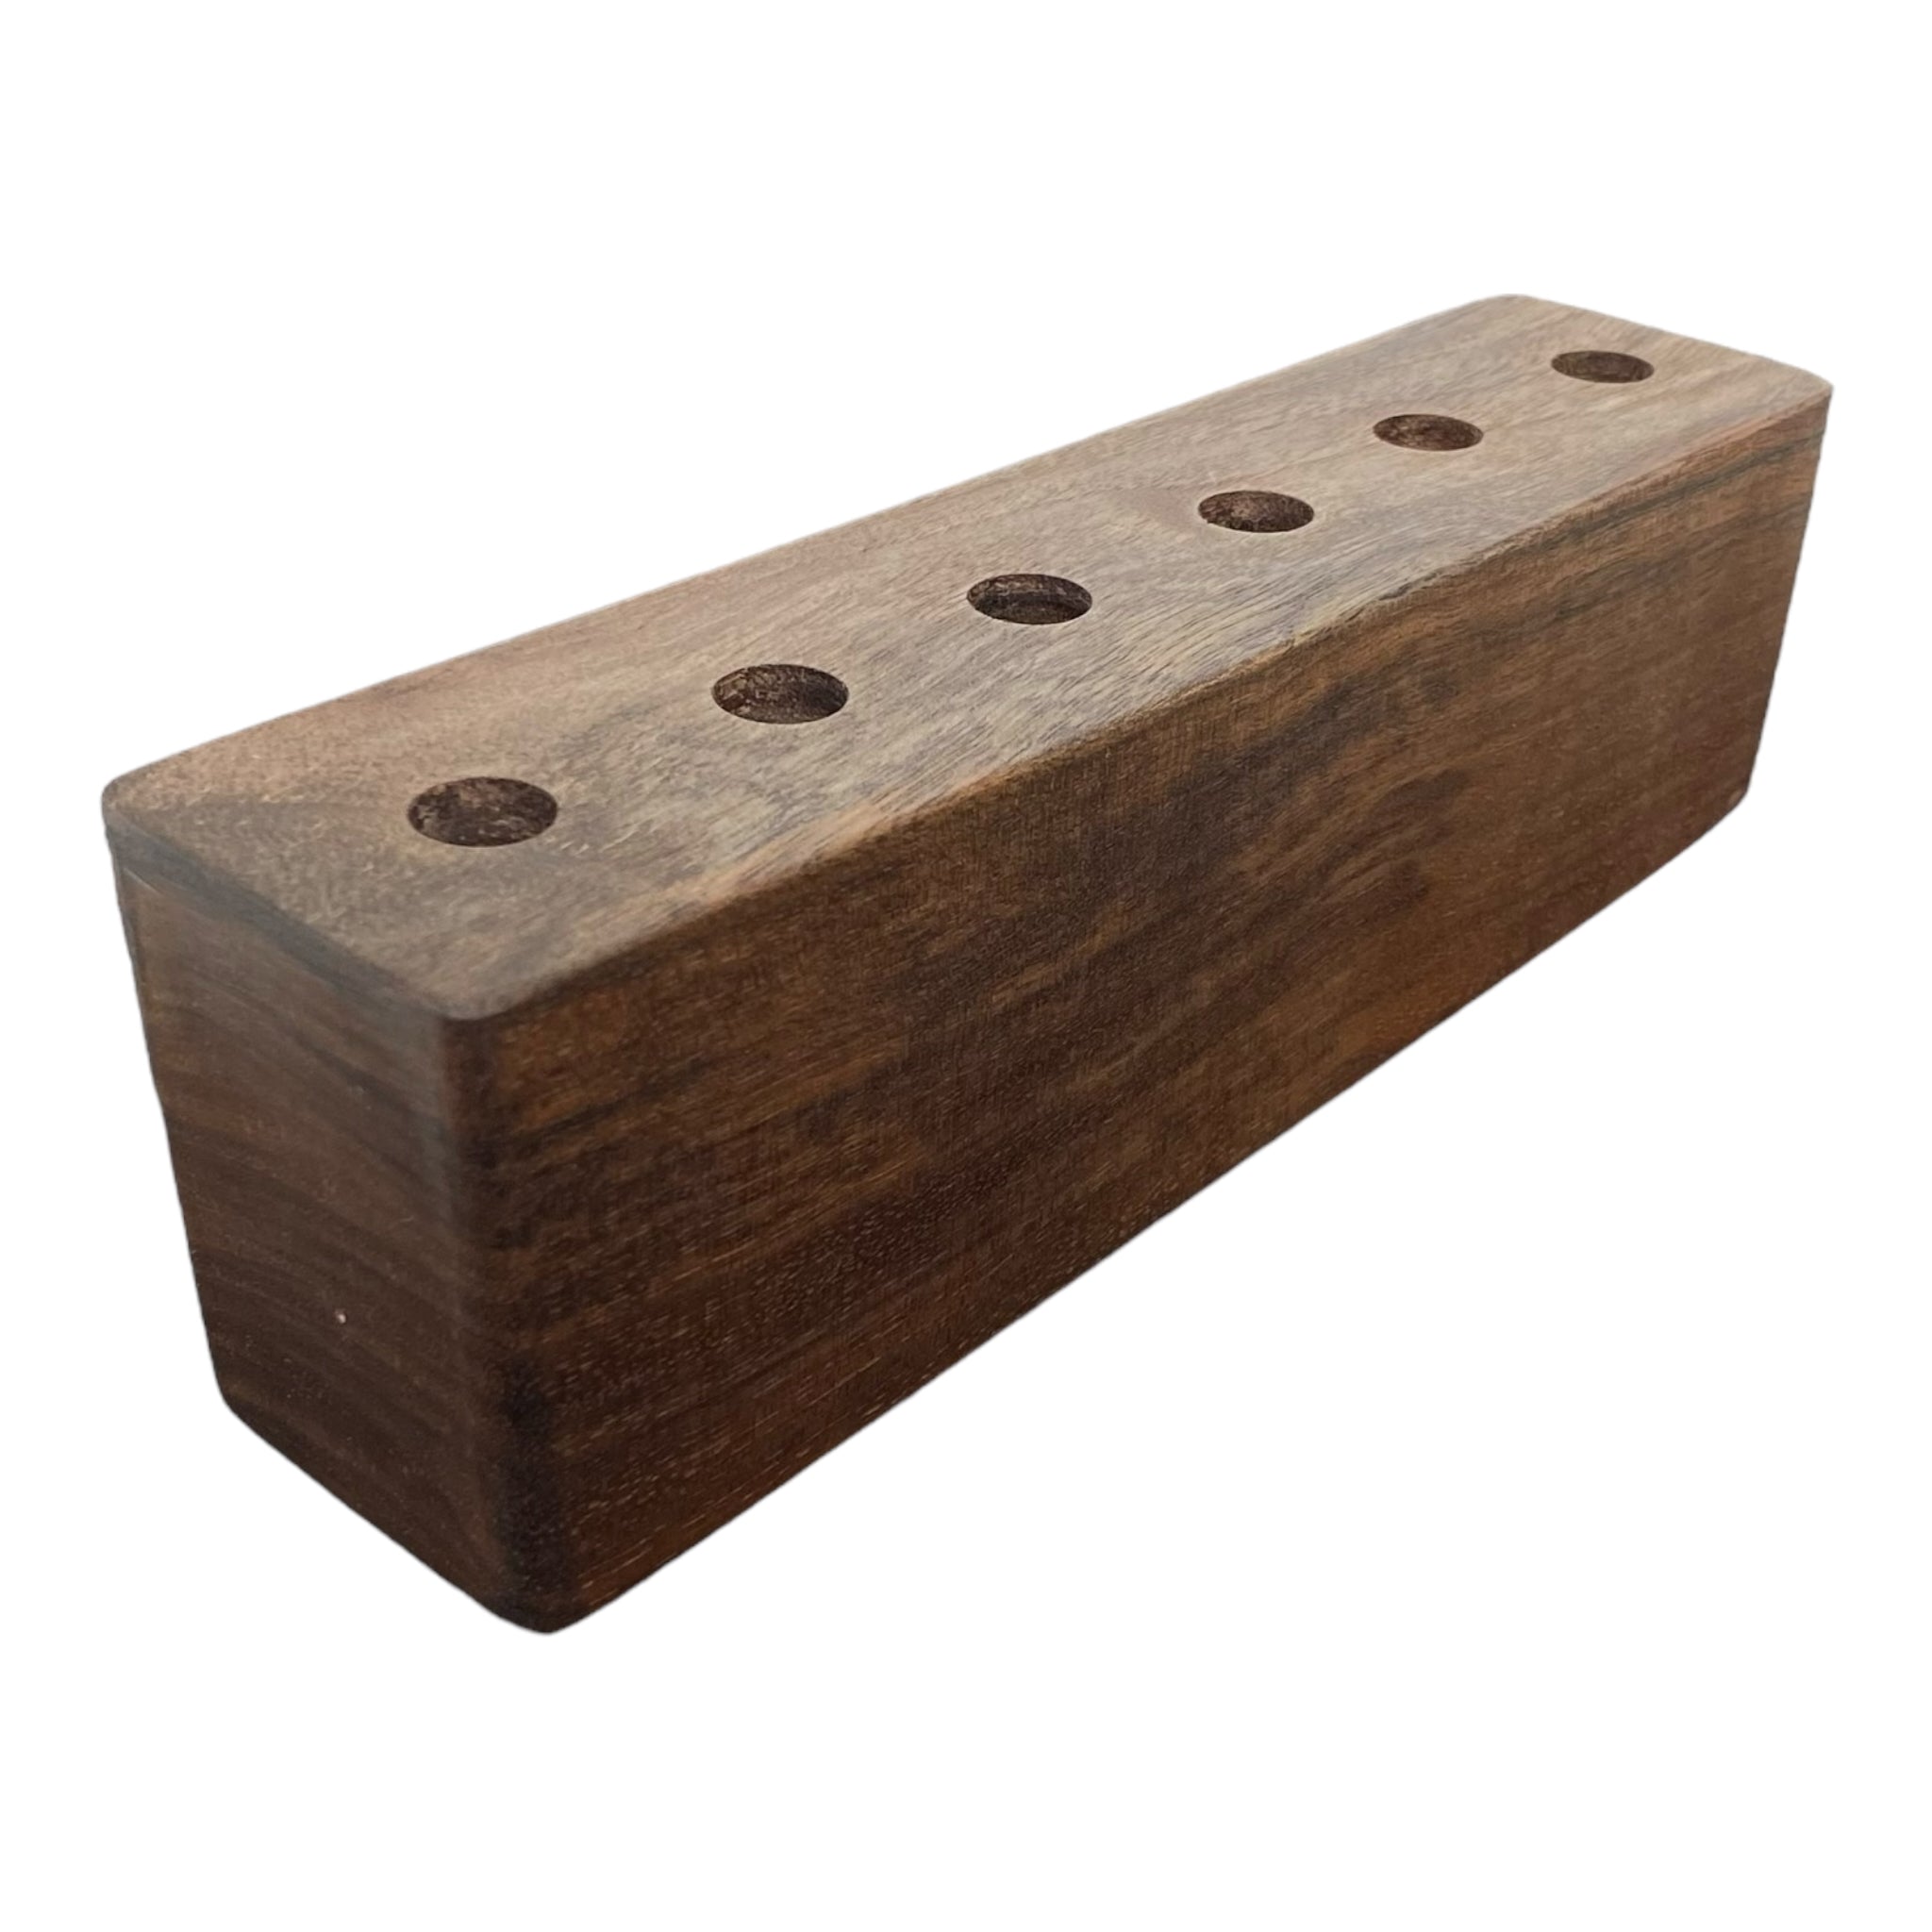 6 Hole Wood Display Stand Holder For 14mm Bong Bowl Pieces Or Quartz Bangers - Black Walnut